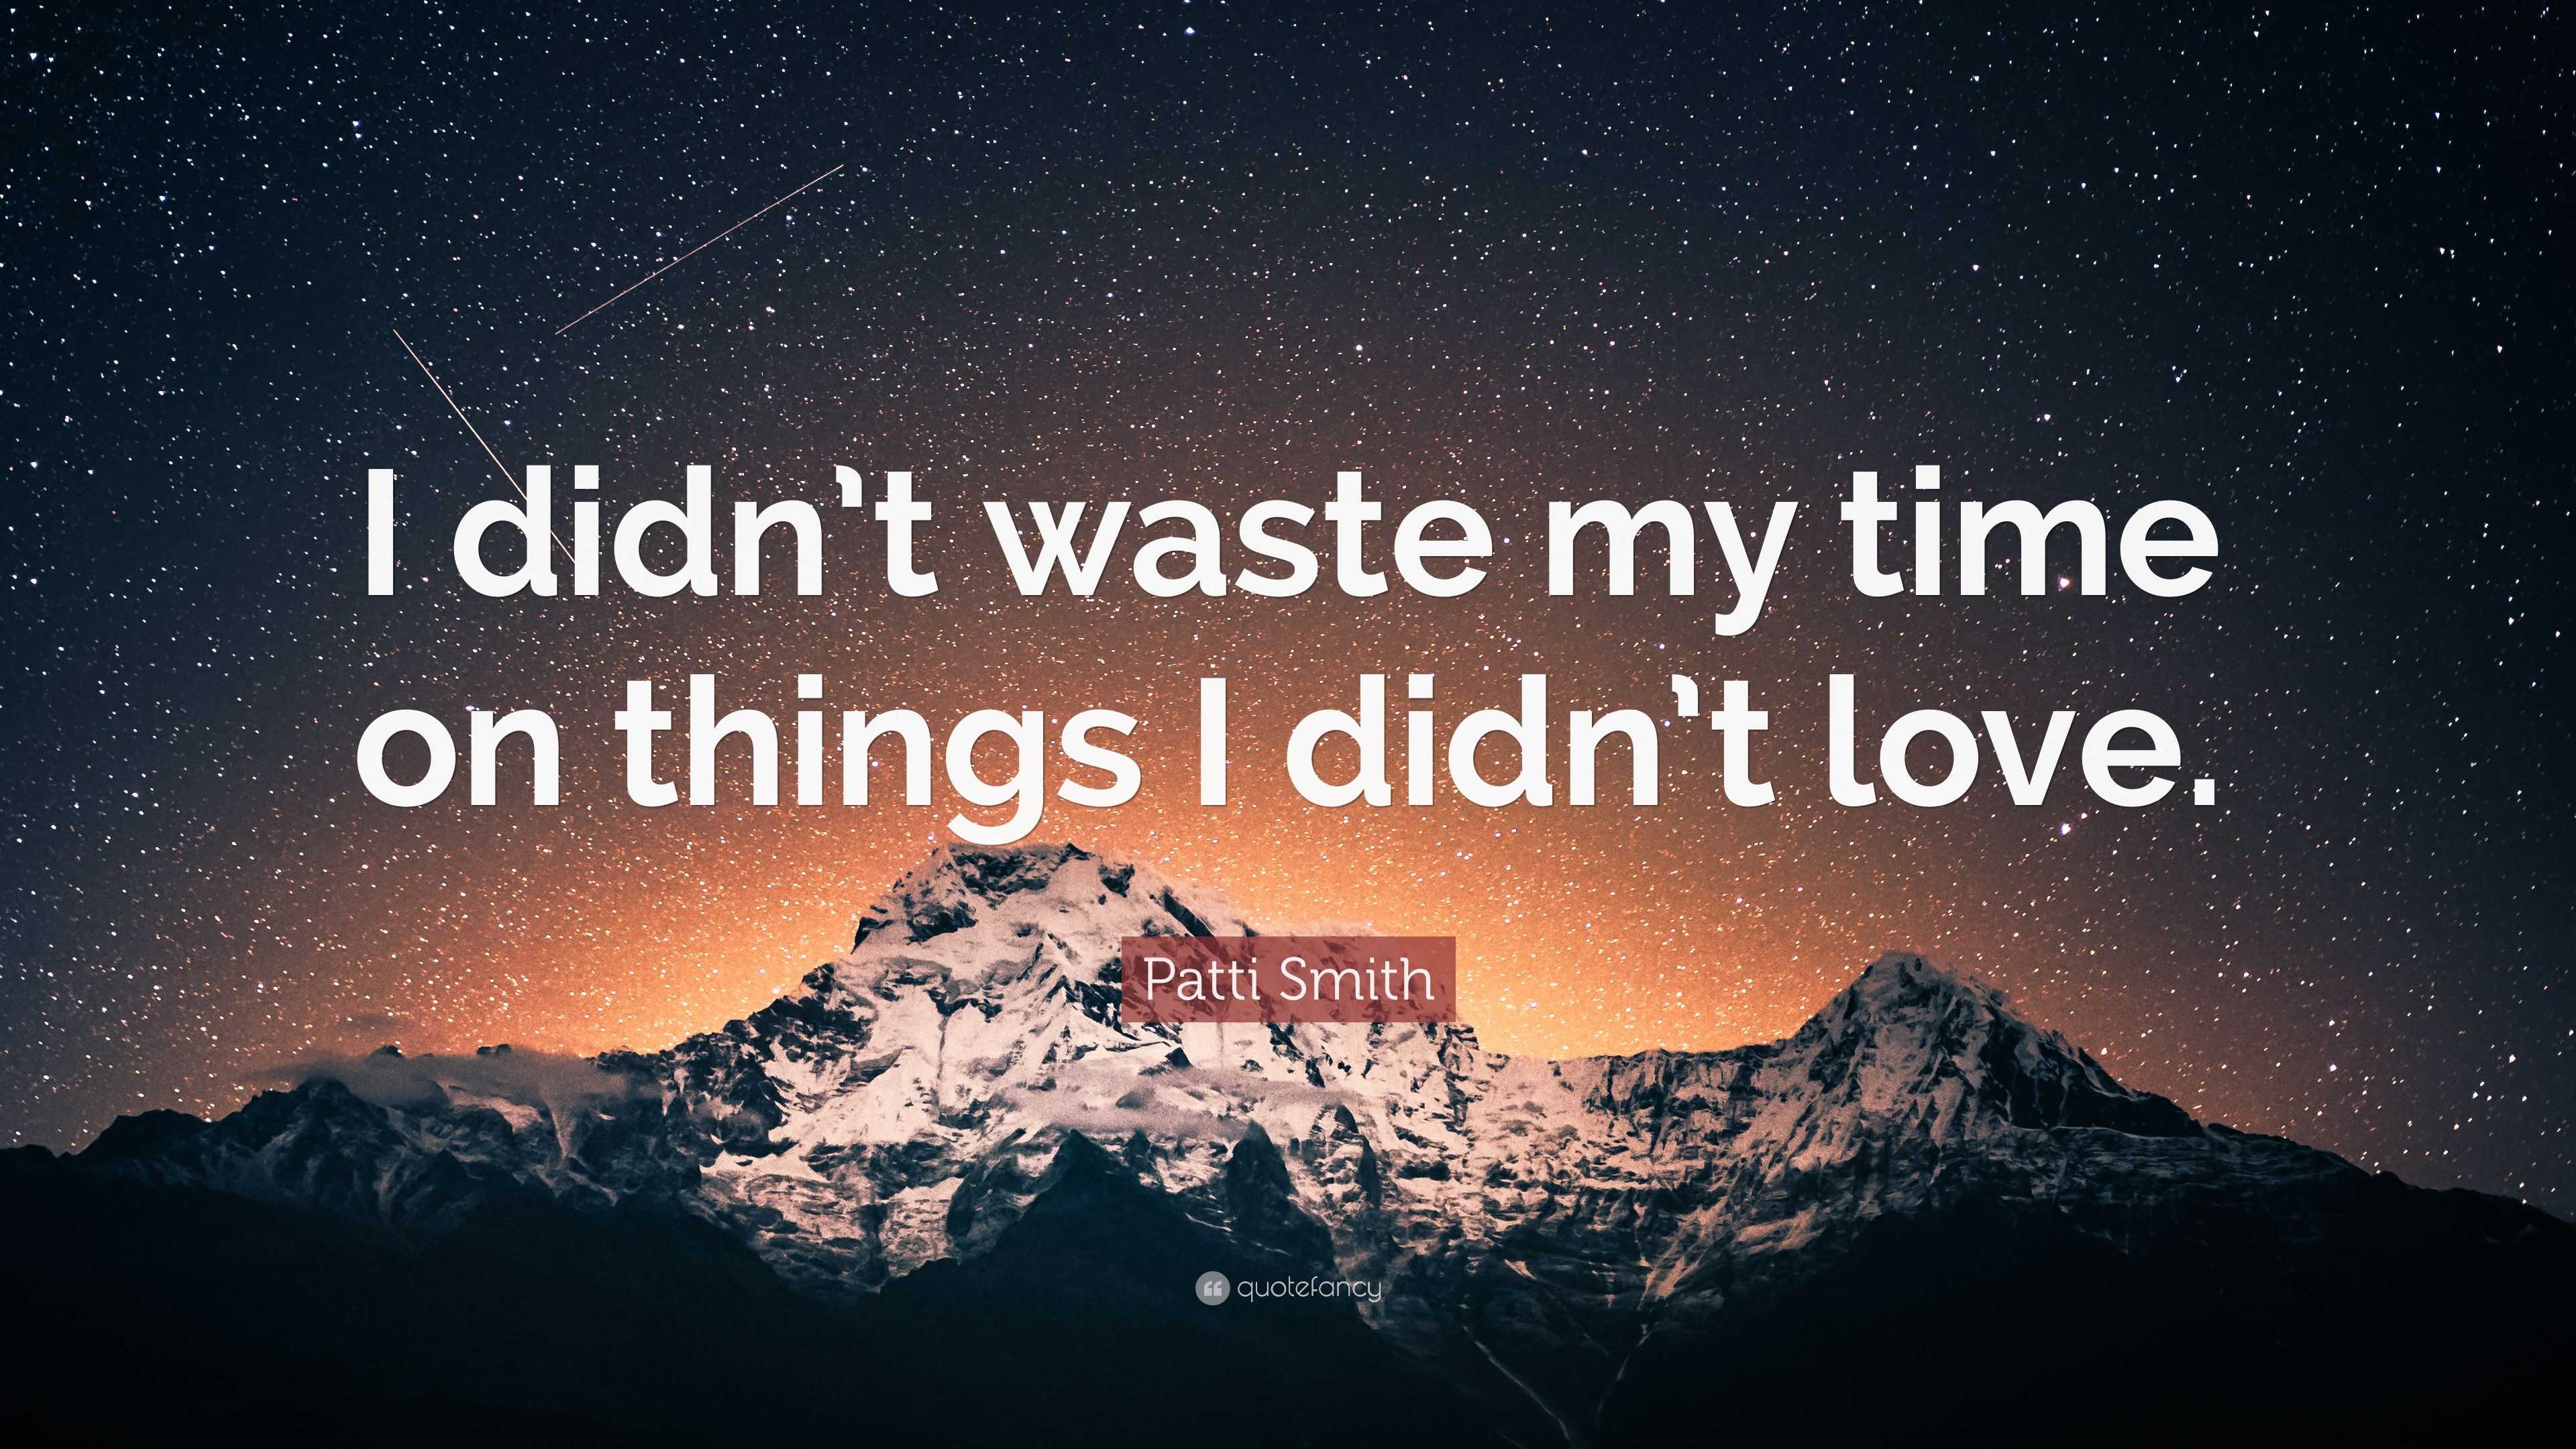 Love happy birthday wishes cards sayings Source · Patti Smith Quote I didn t waste my time on things I didn